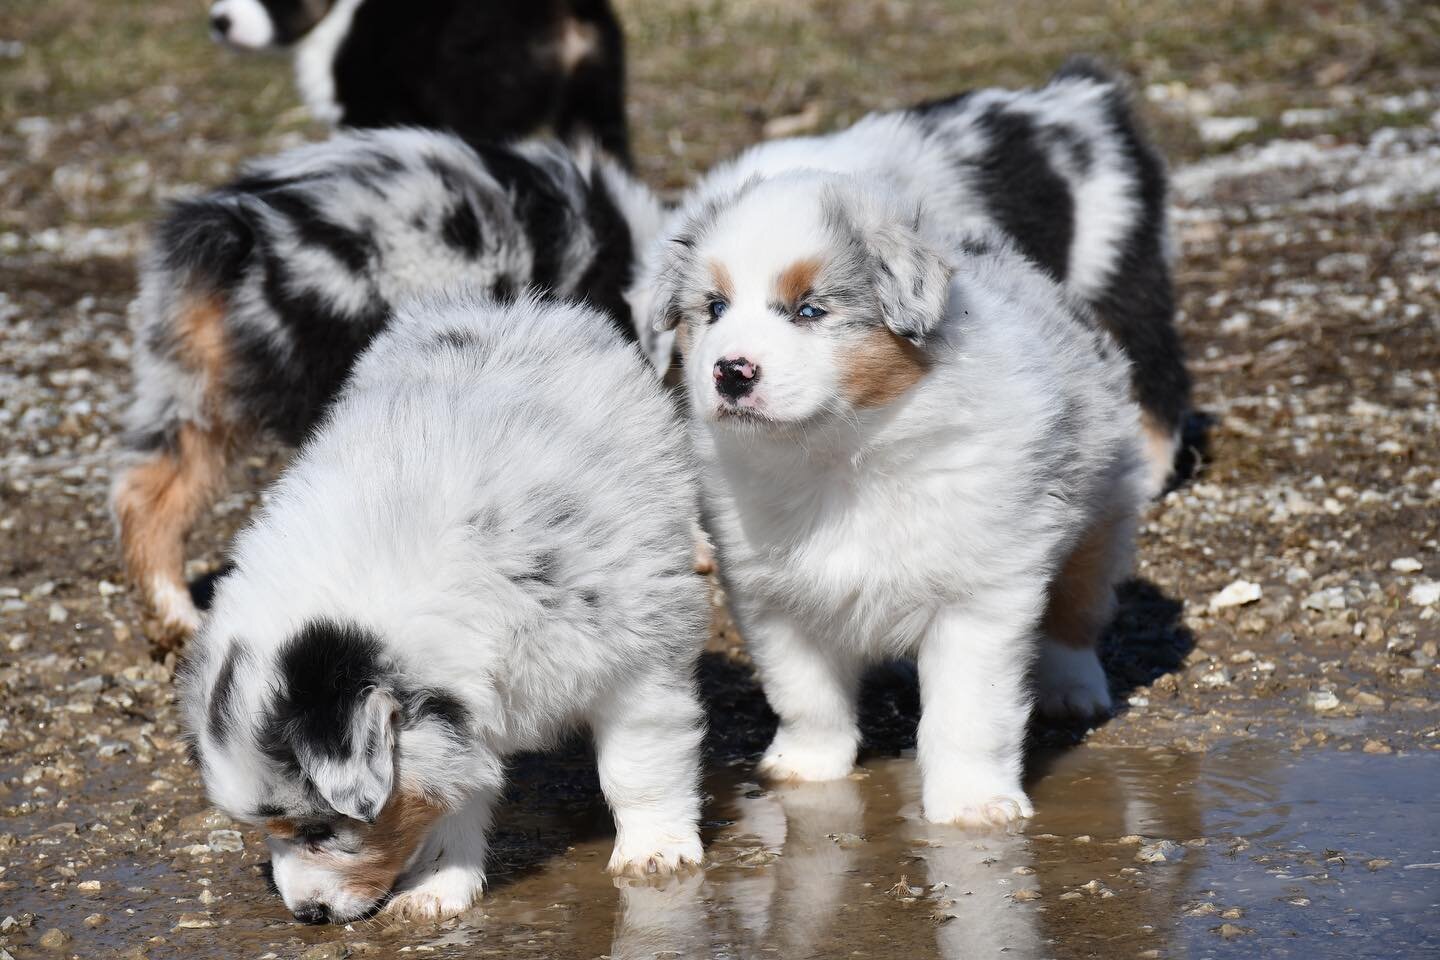 Officially introduced the 6 week old puppies to what being an Aussie really means. They played in their first mud puddle today. Paramour and Sly were definitely the biggest fans!